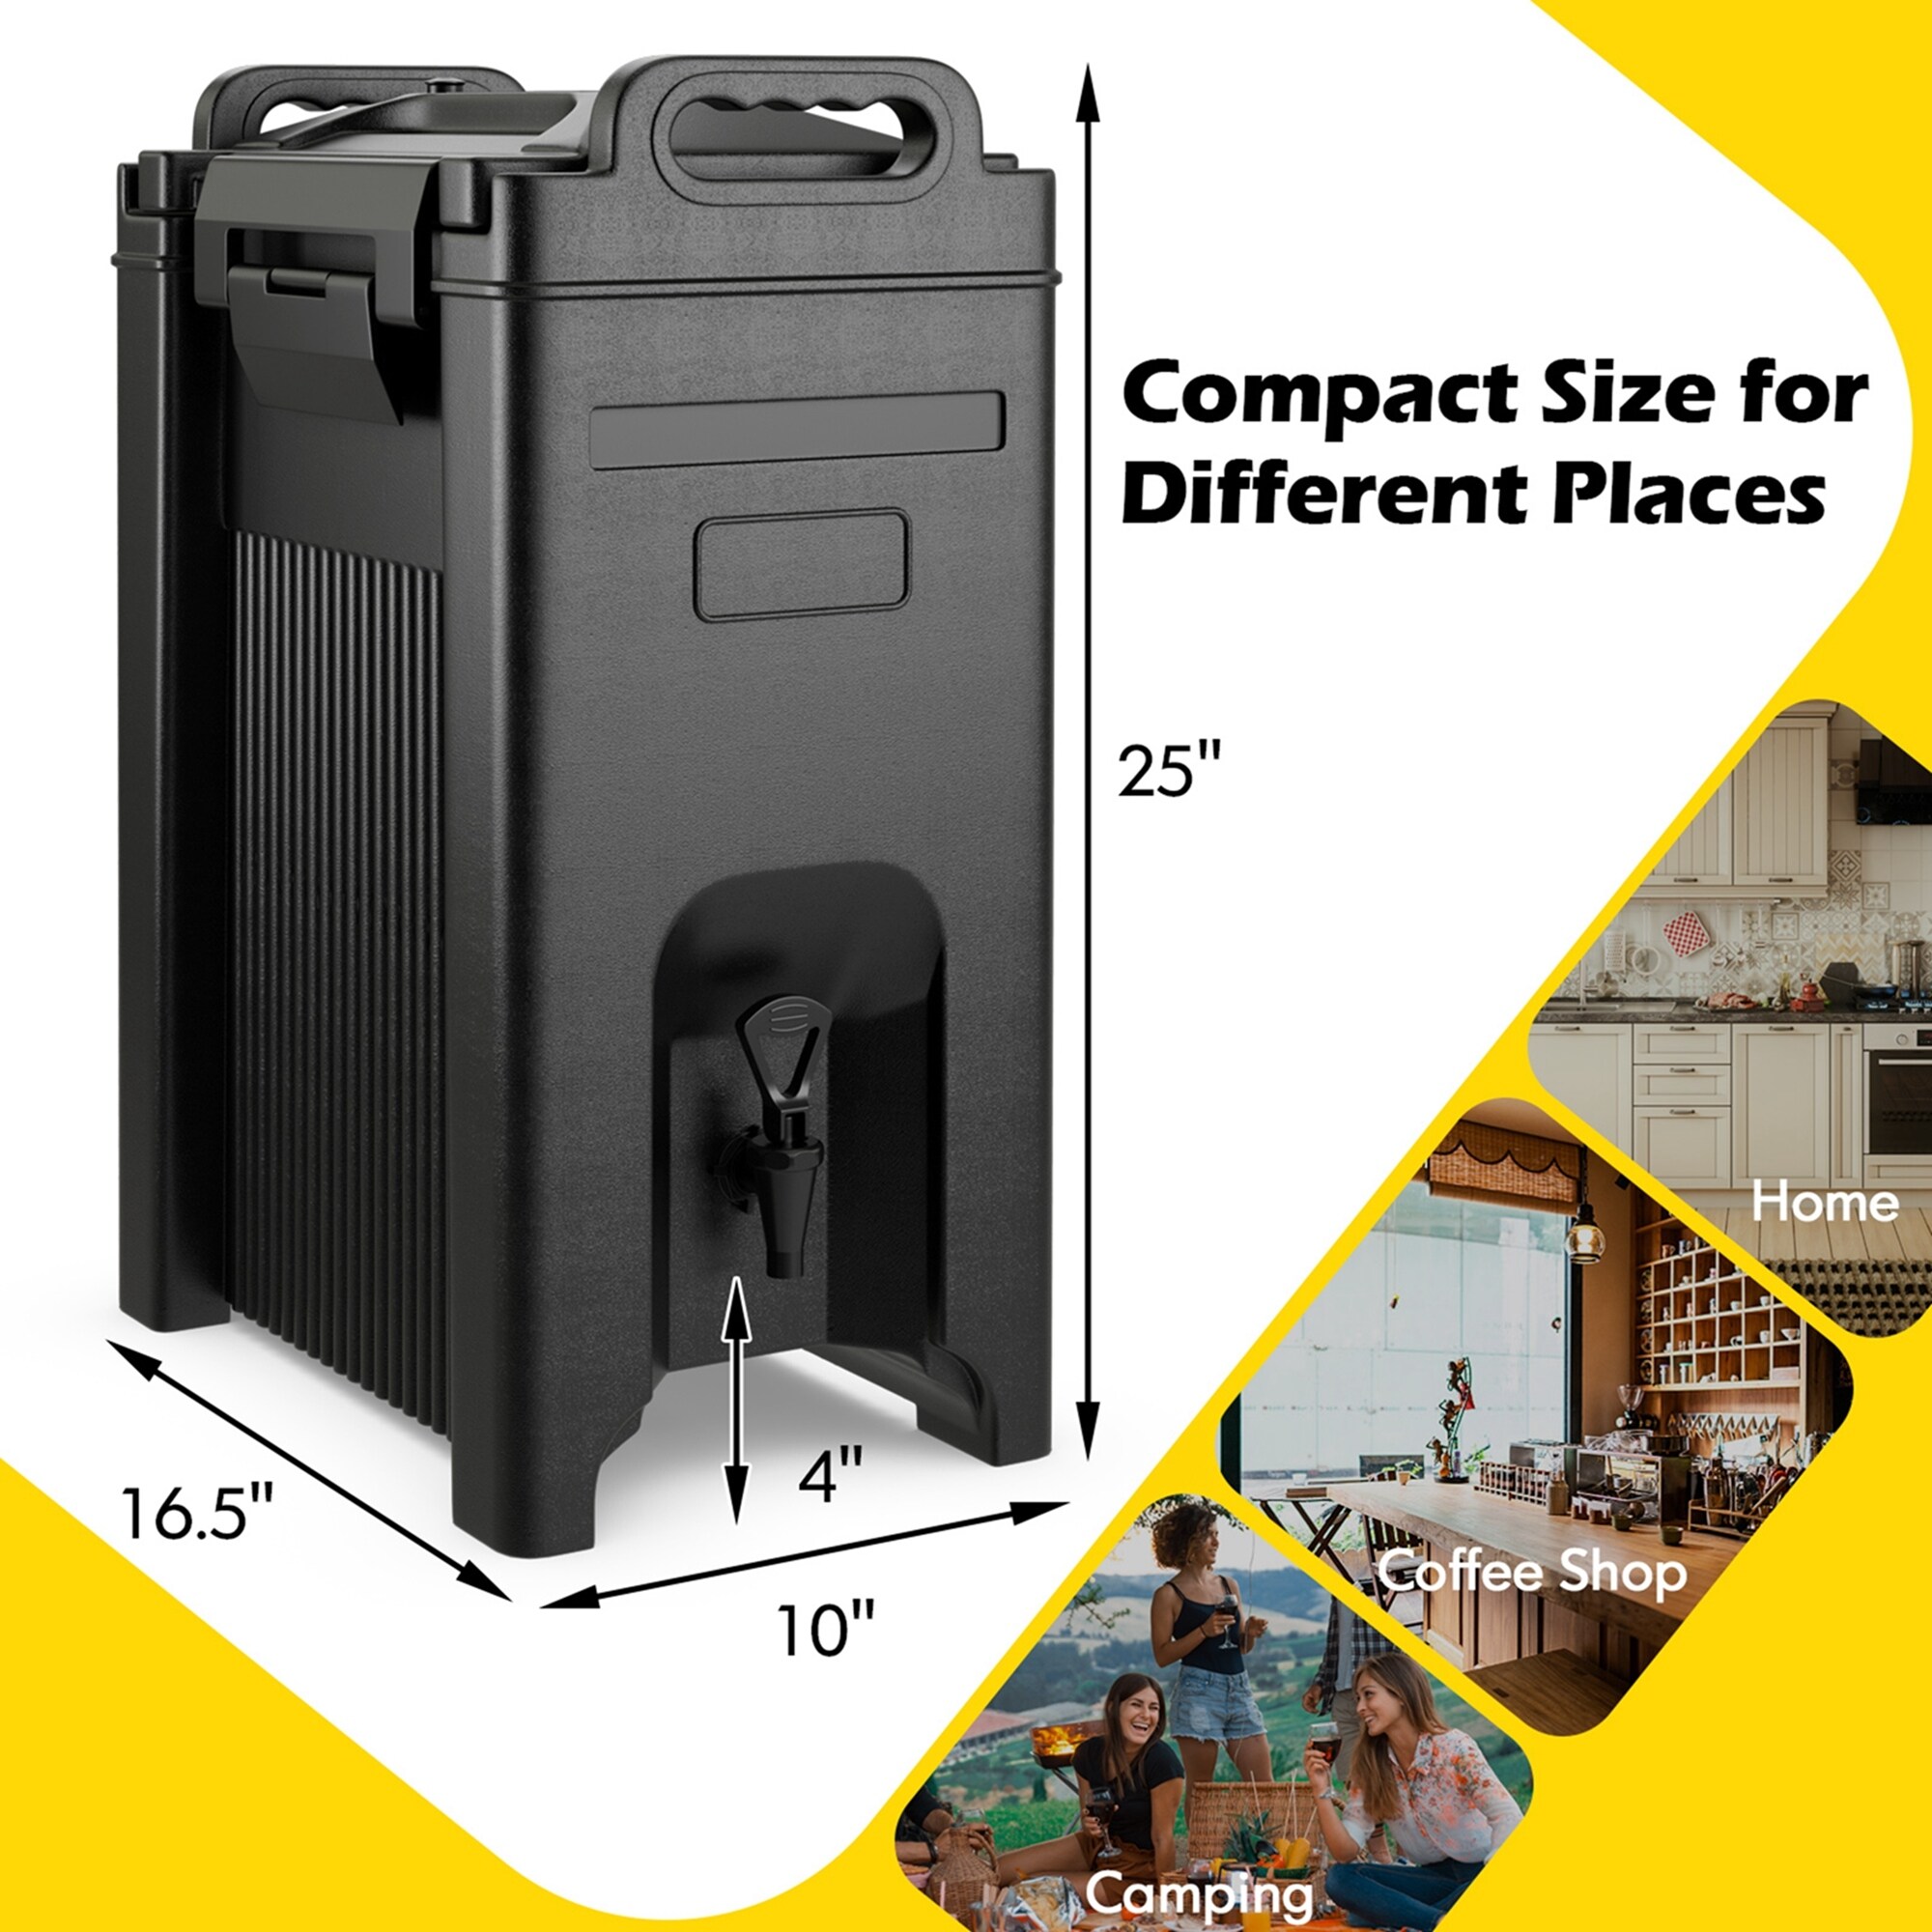 https://ak1.ostkcdn.com/images/products/is/images/direct/61922ca689eec0449f9ac0d296d3e2dbf984a7e4/Costway-Insulated-Beverage-Server-Dispenser-5-Gallon-Hot-Cold-Drinks.jpg